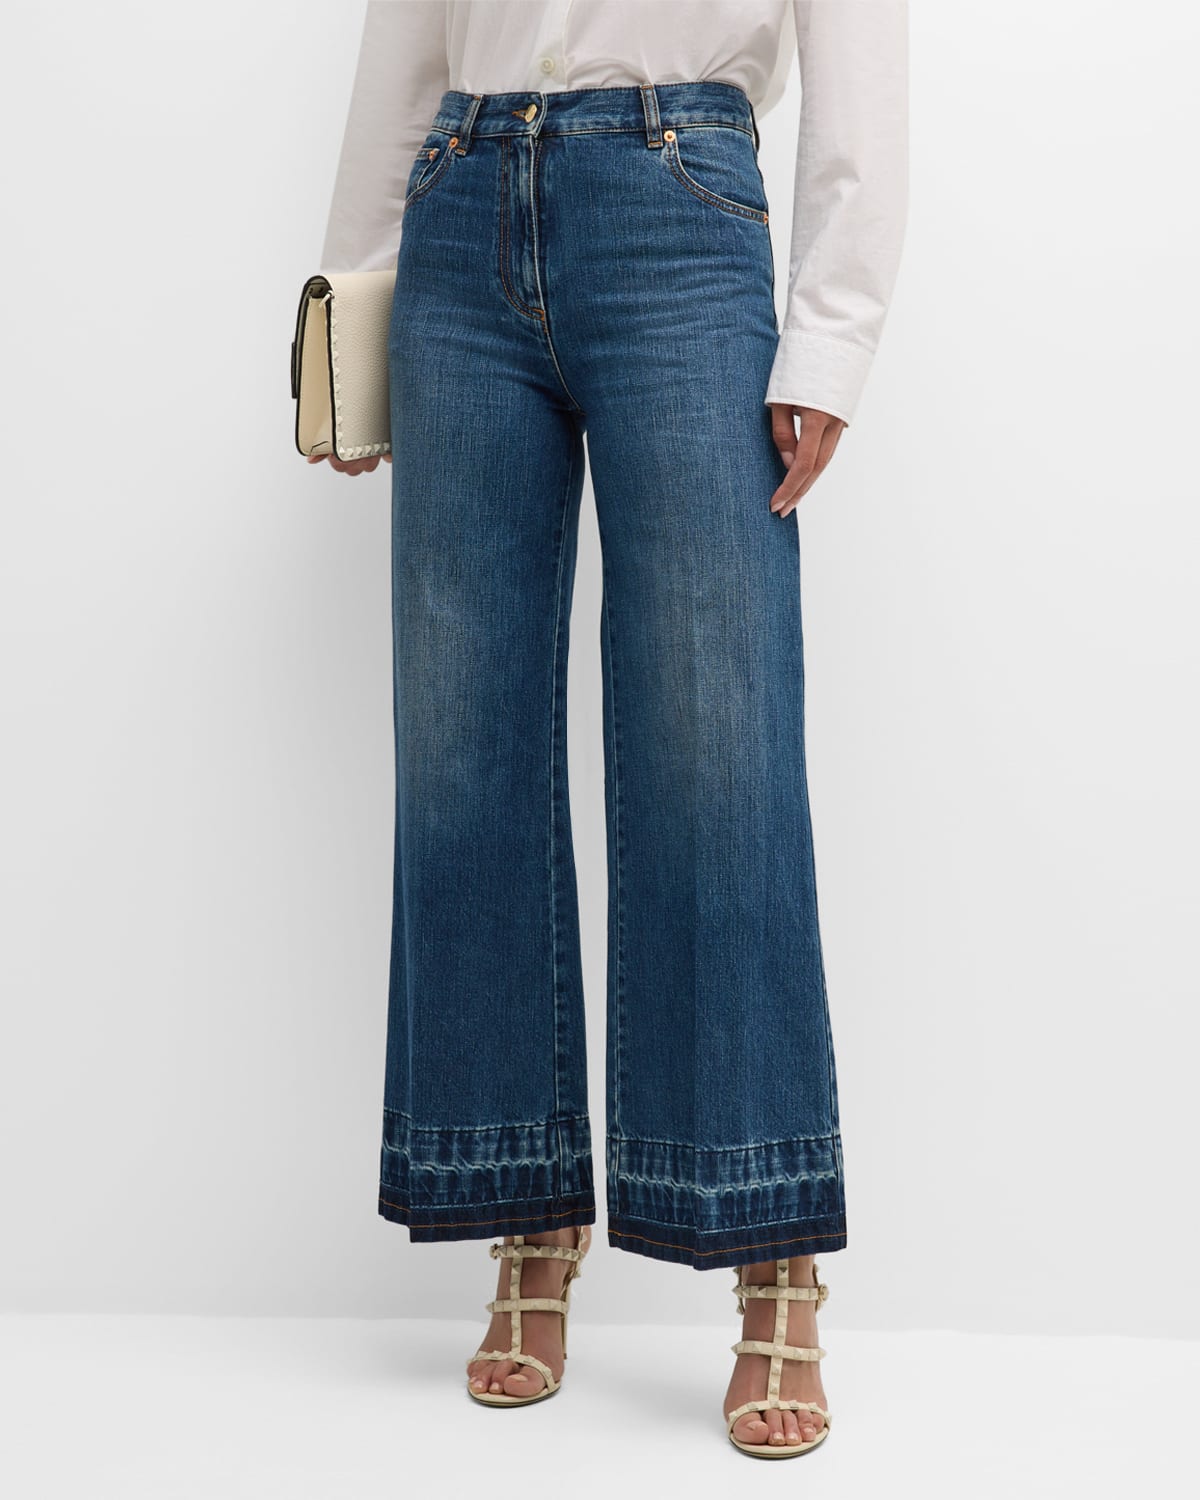 RED Valentino cropped flared jeans - Blue